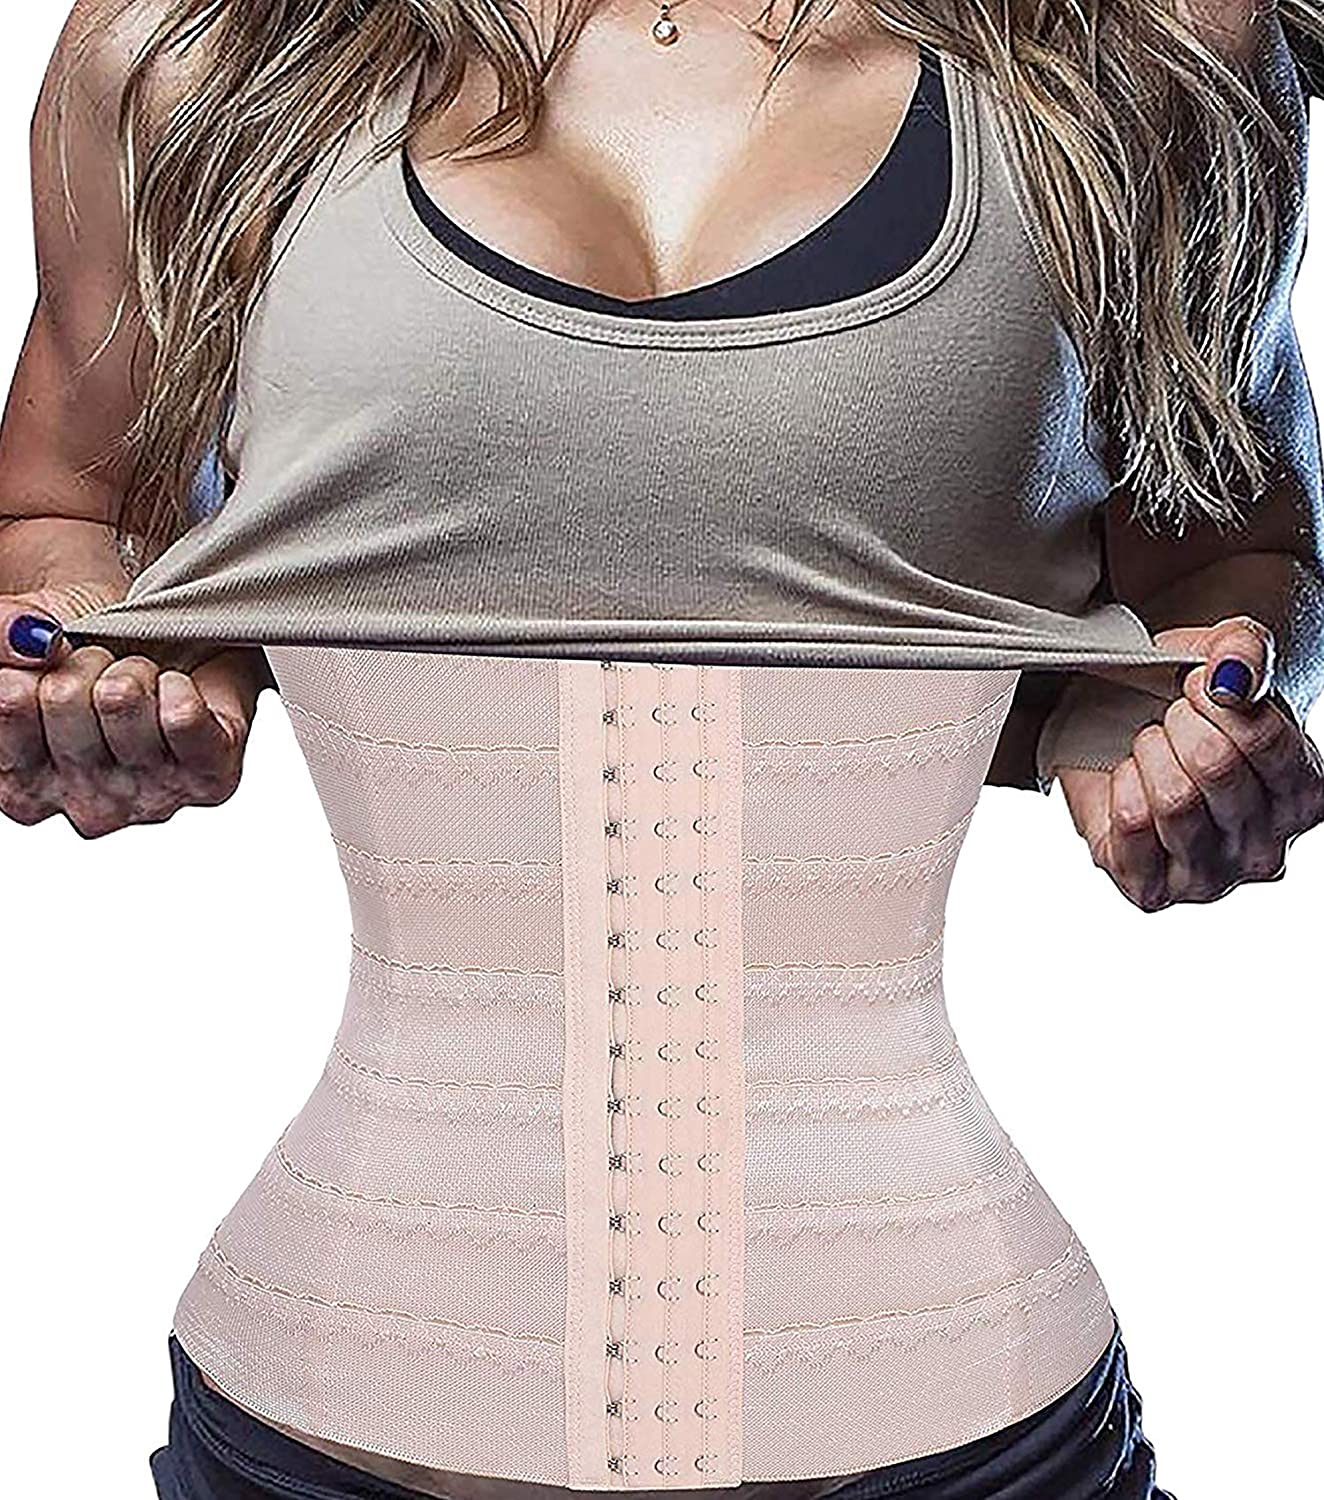 6 Day Top workout waist trainers for Push Pull Legs